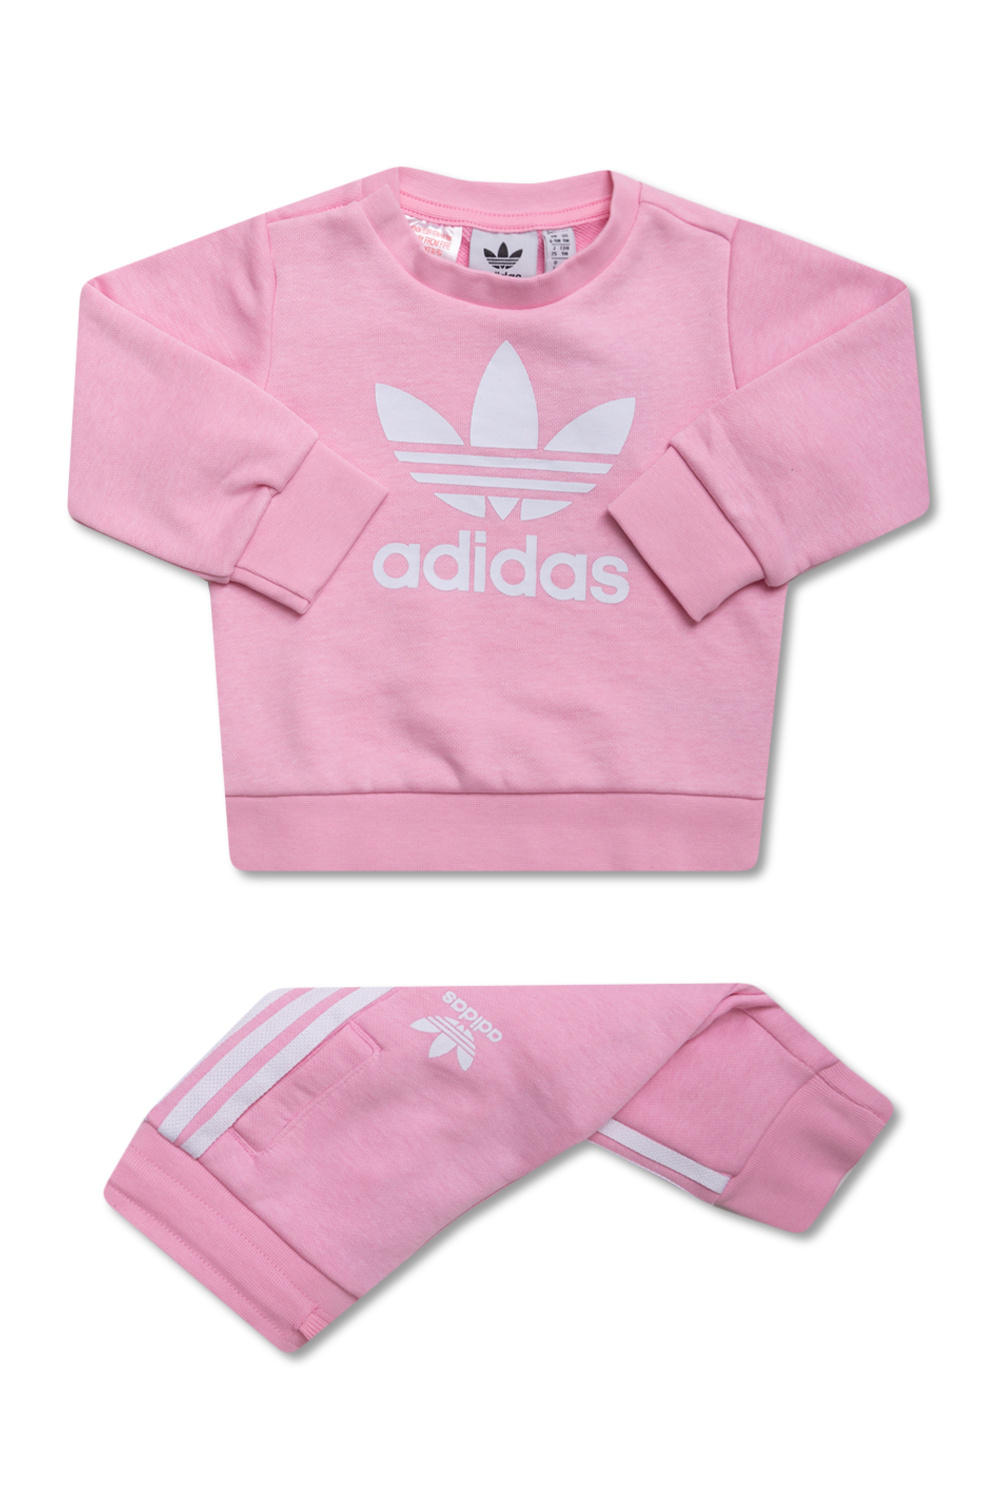 IetpShops Italy - dresy ortalionowe adidas pants - Pink adidas outlet  winkel shoes clearance list price ADIDAS Kids